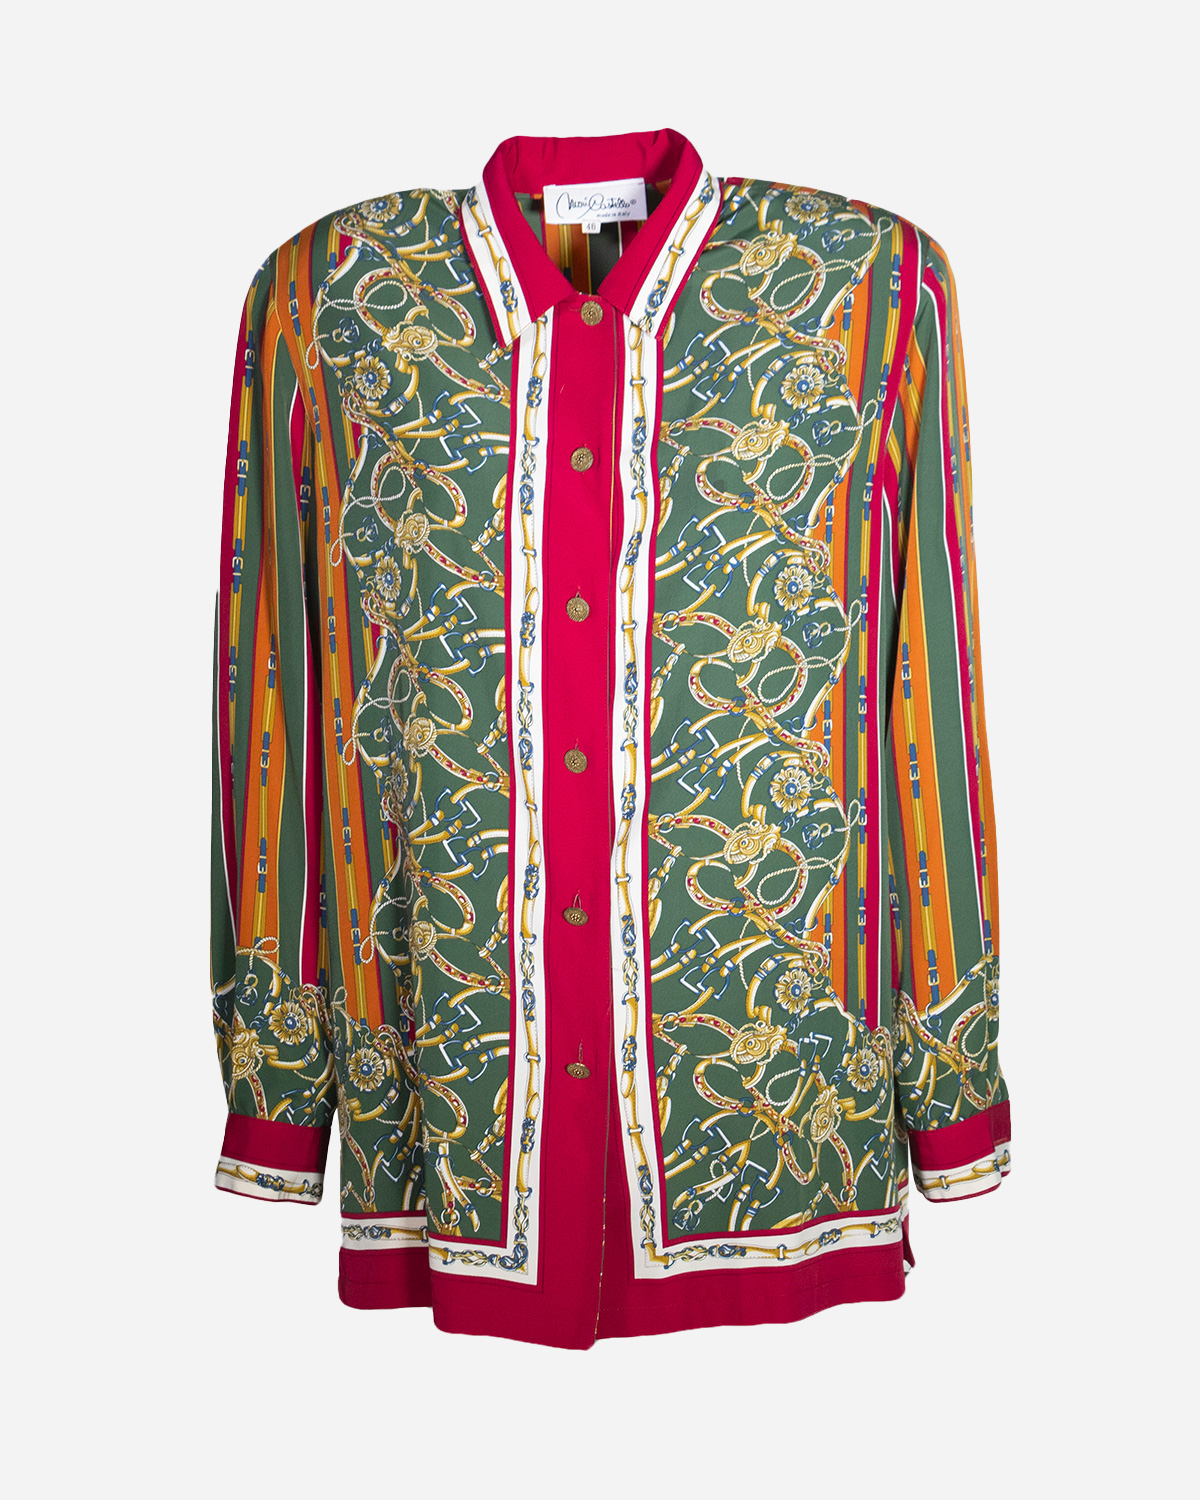 Baroque patterned shirts